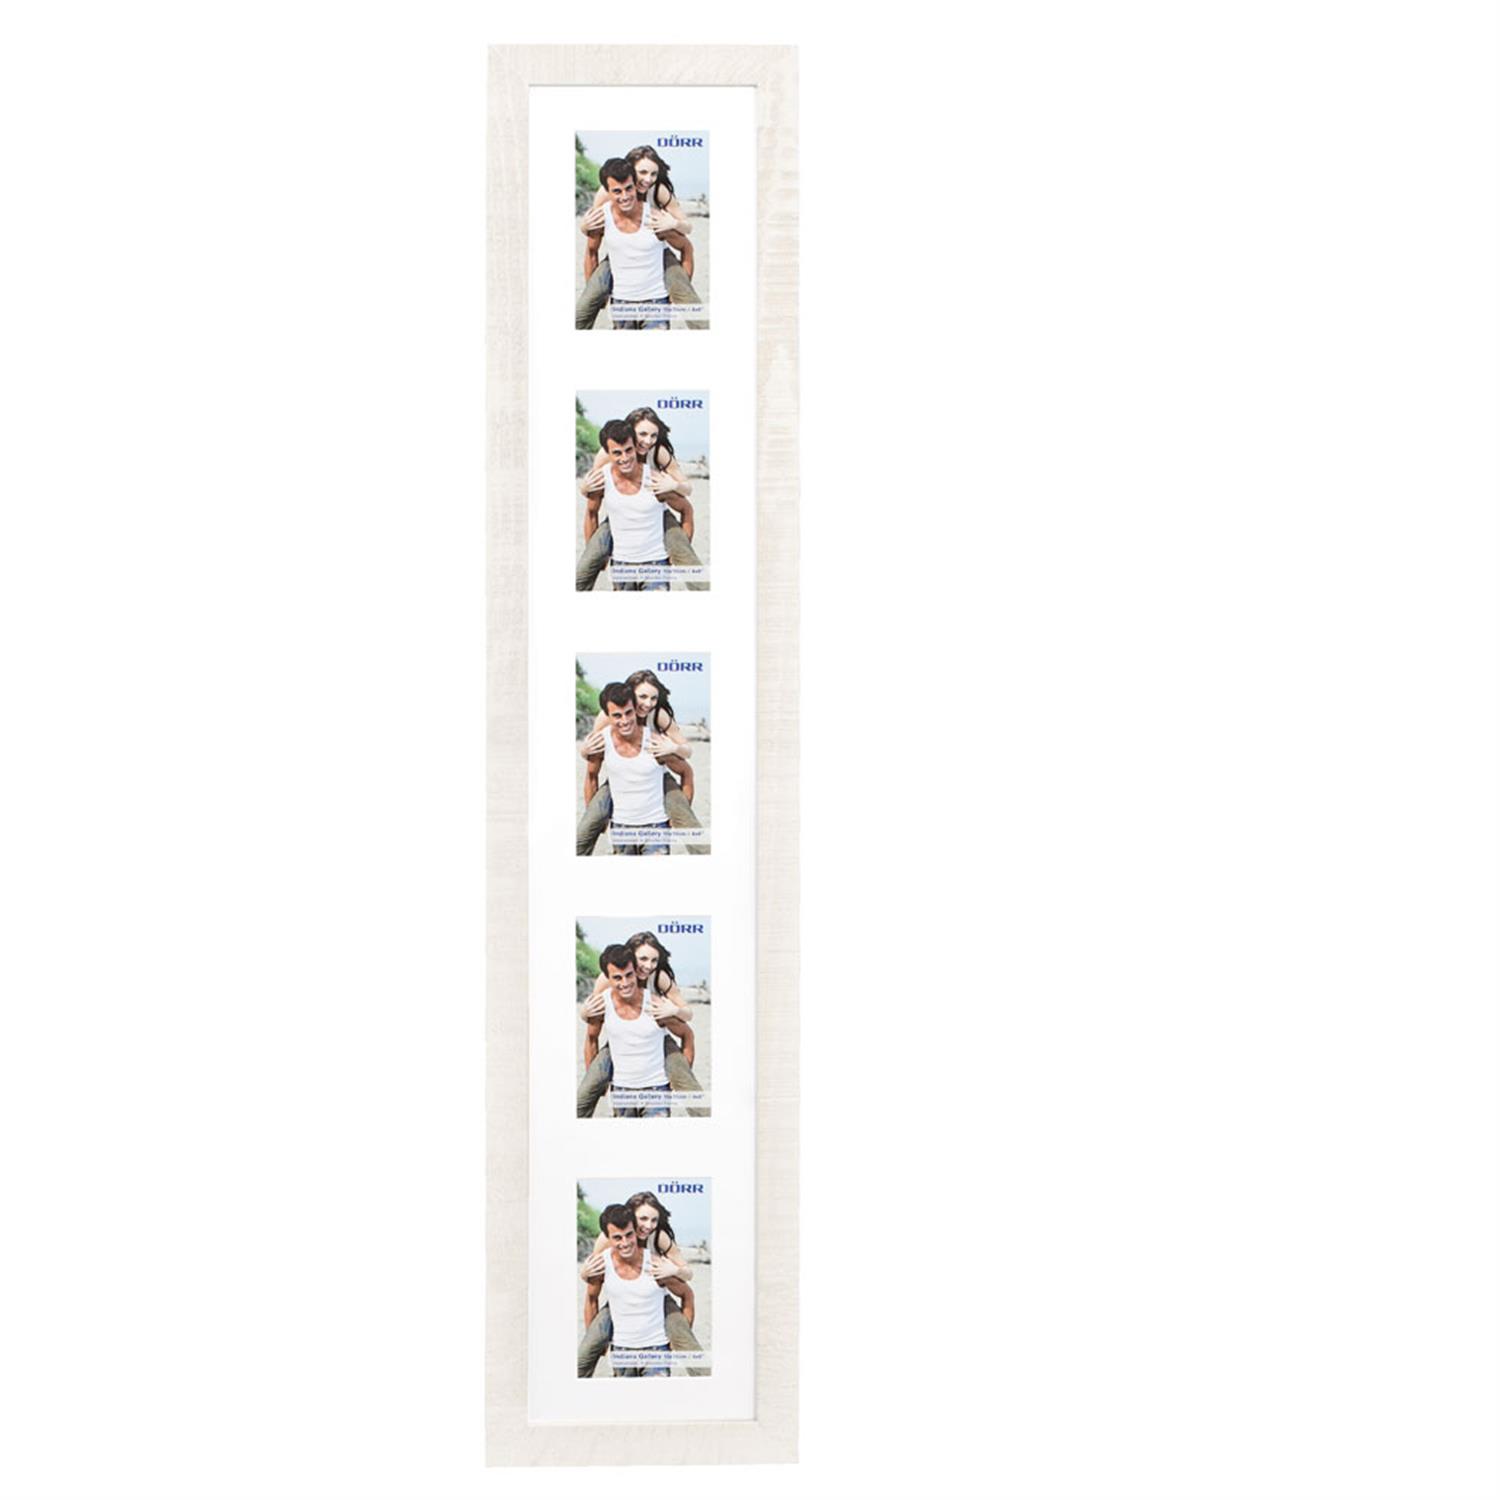 Dorr Indiana Vertical White Gallery Frame for 5 6x4 Photos